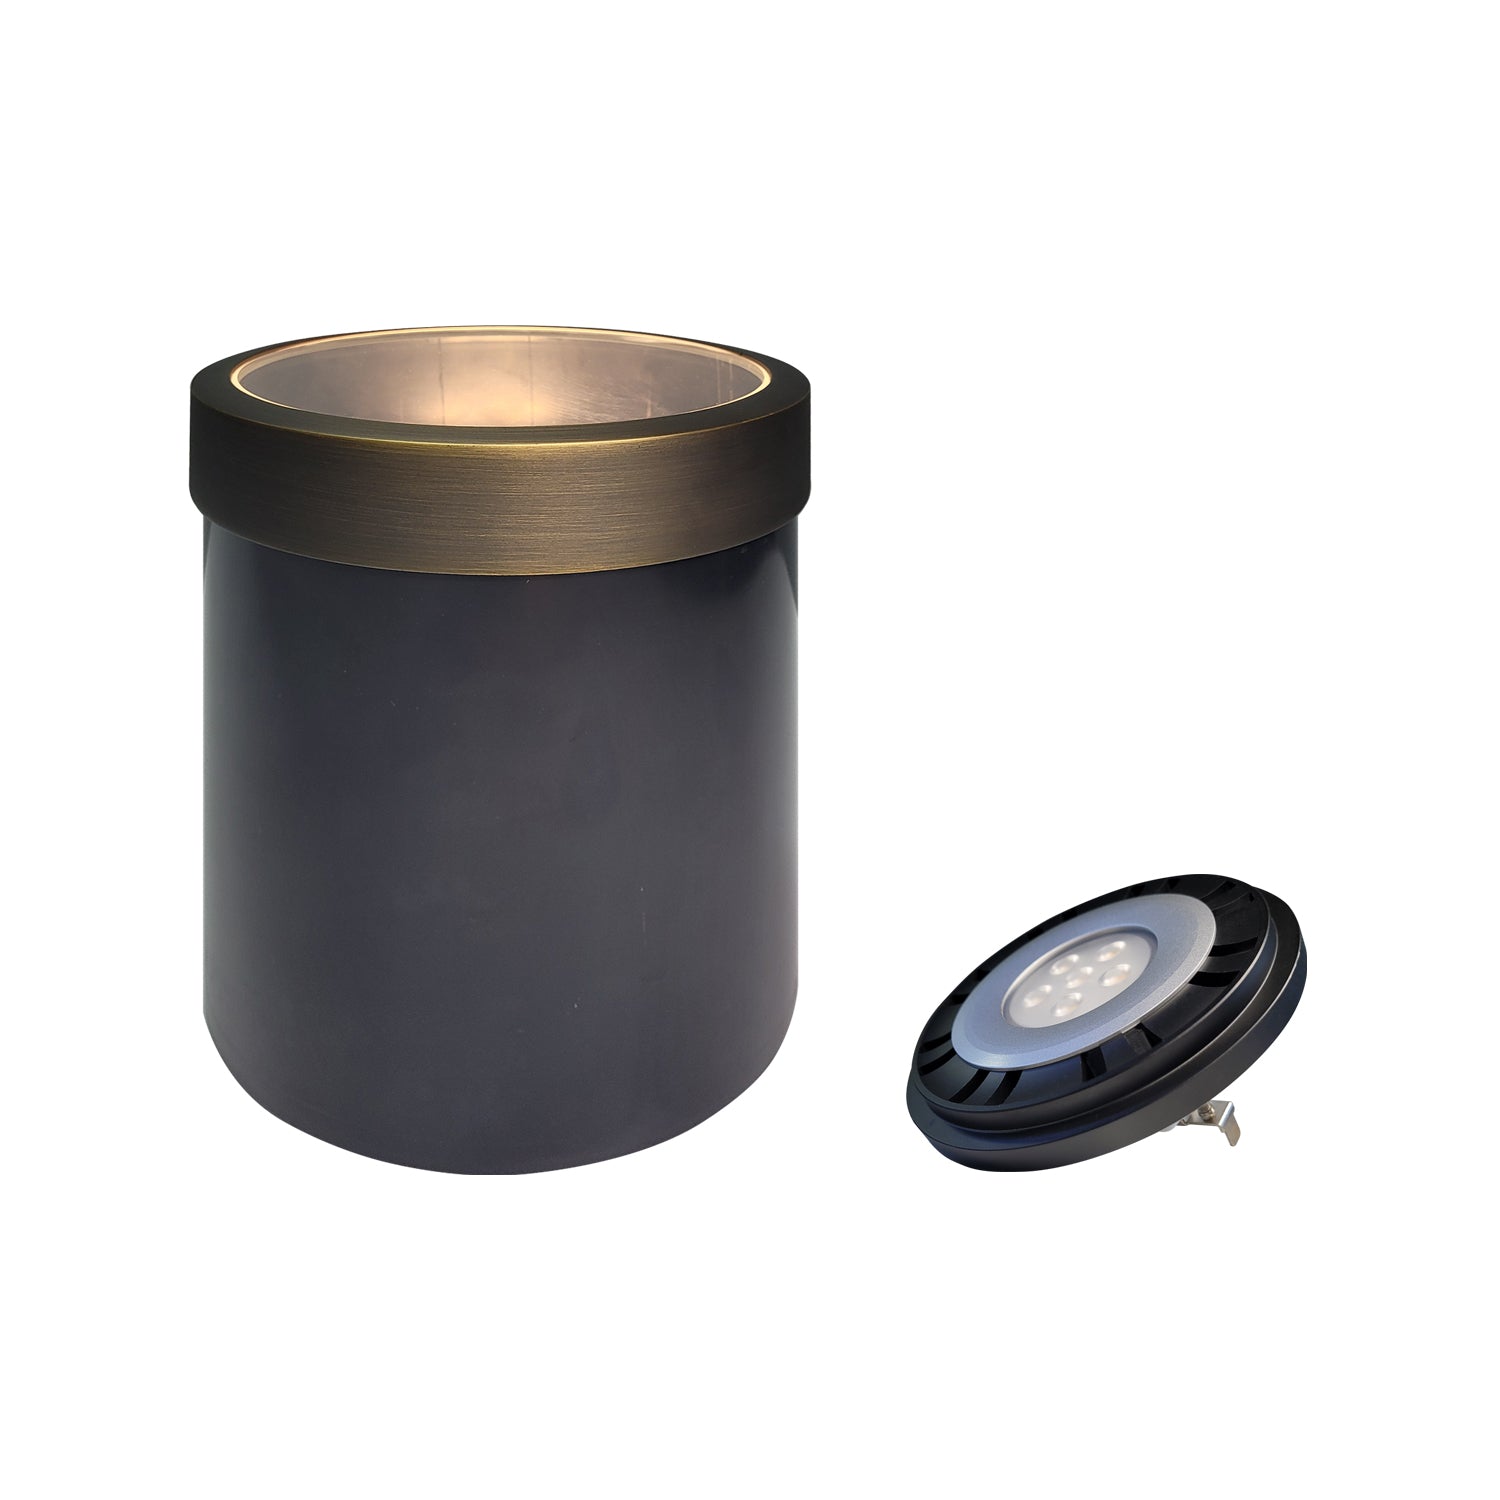 LED outdoor low voltage in-ground well light COG302B for pathway lighting.